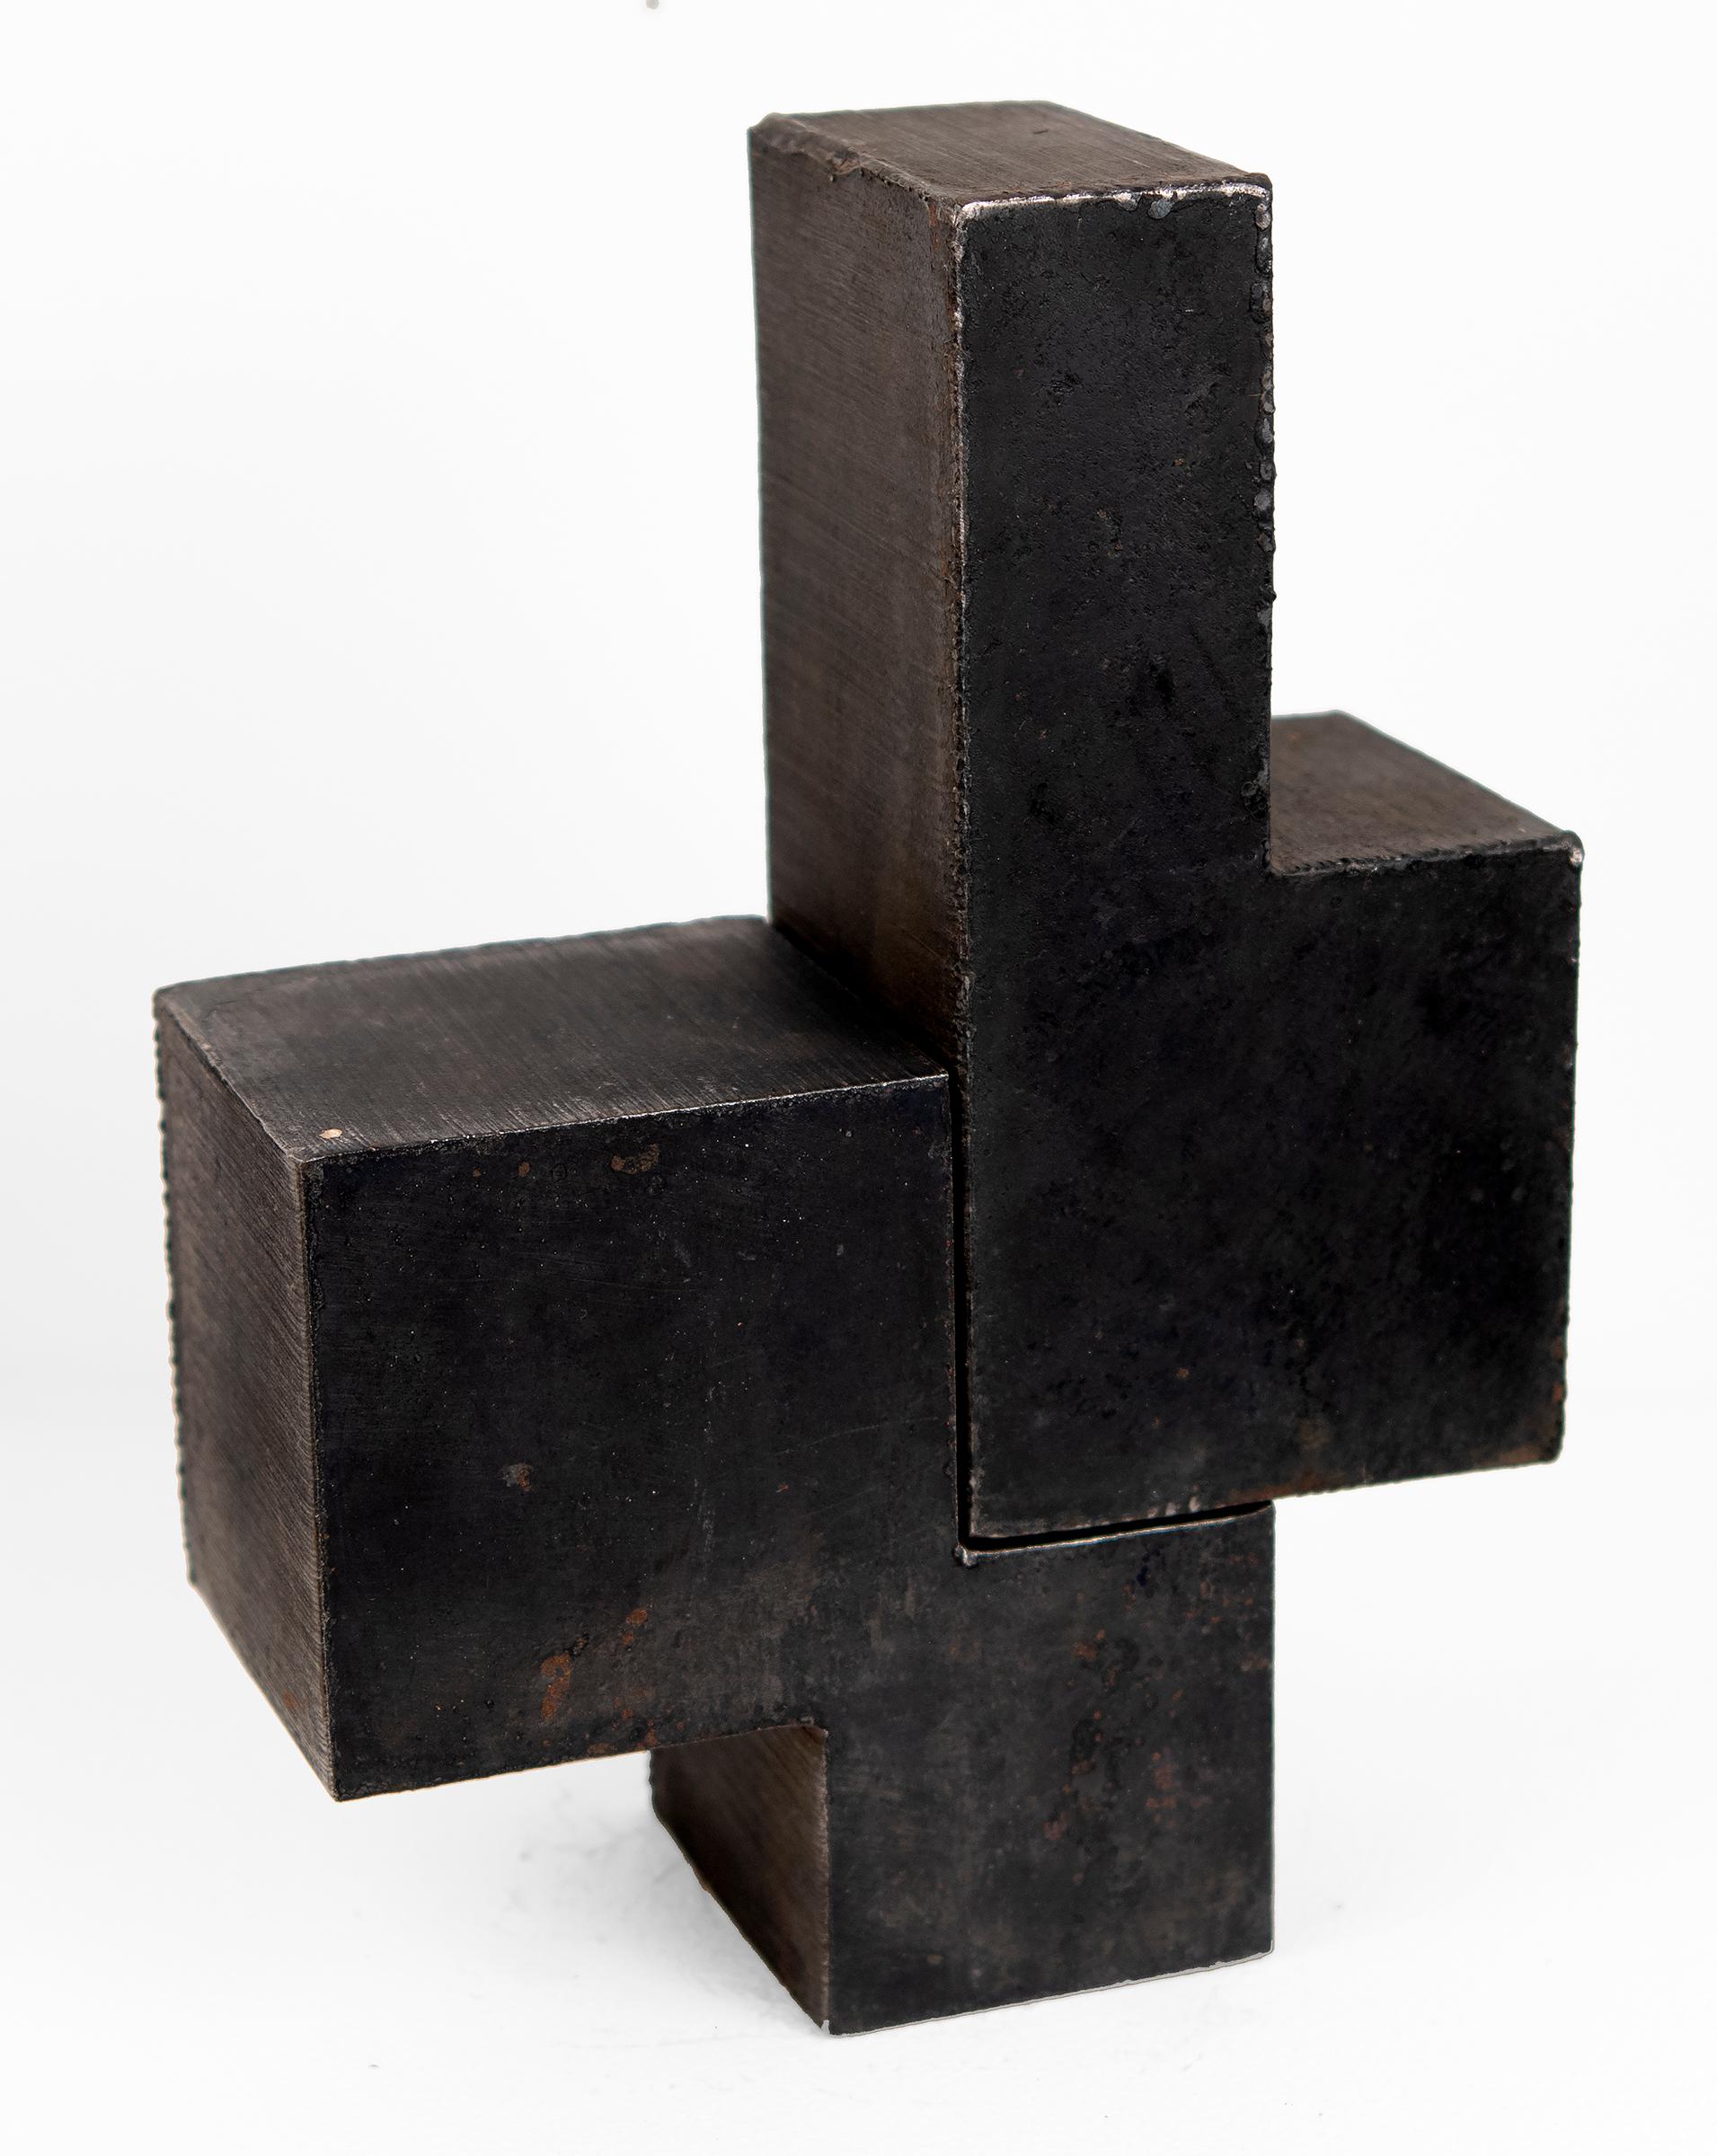 Jonathan Waters Abstract Sculpture - untitled sculpture (3)